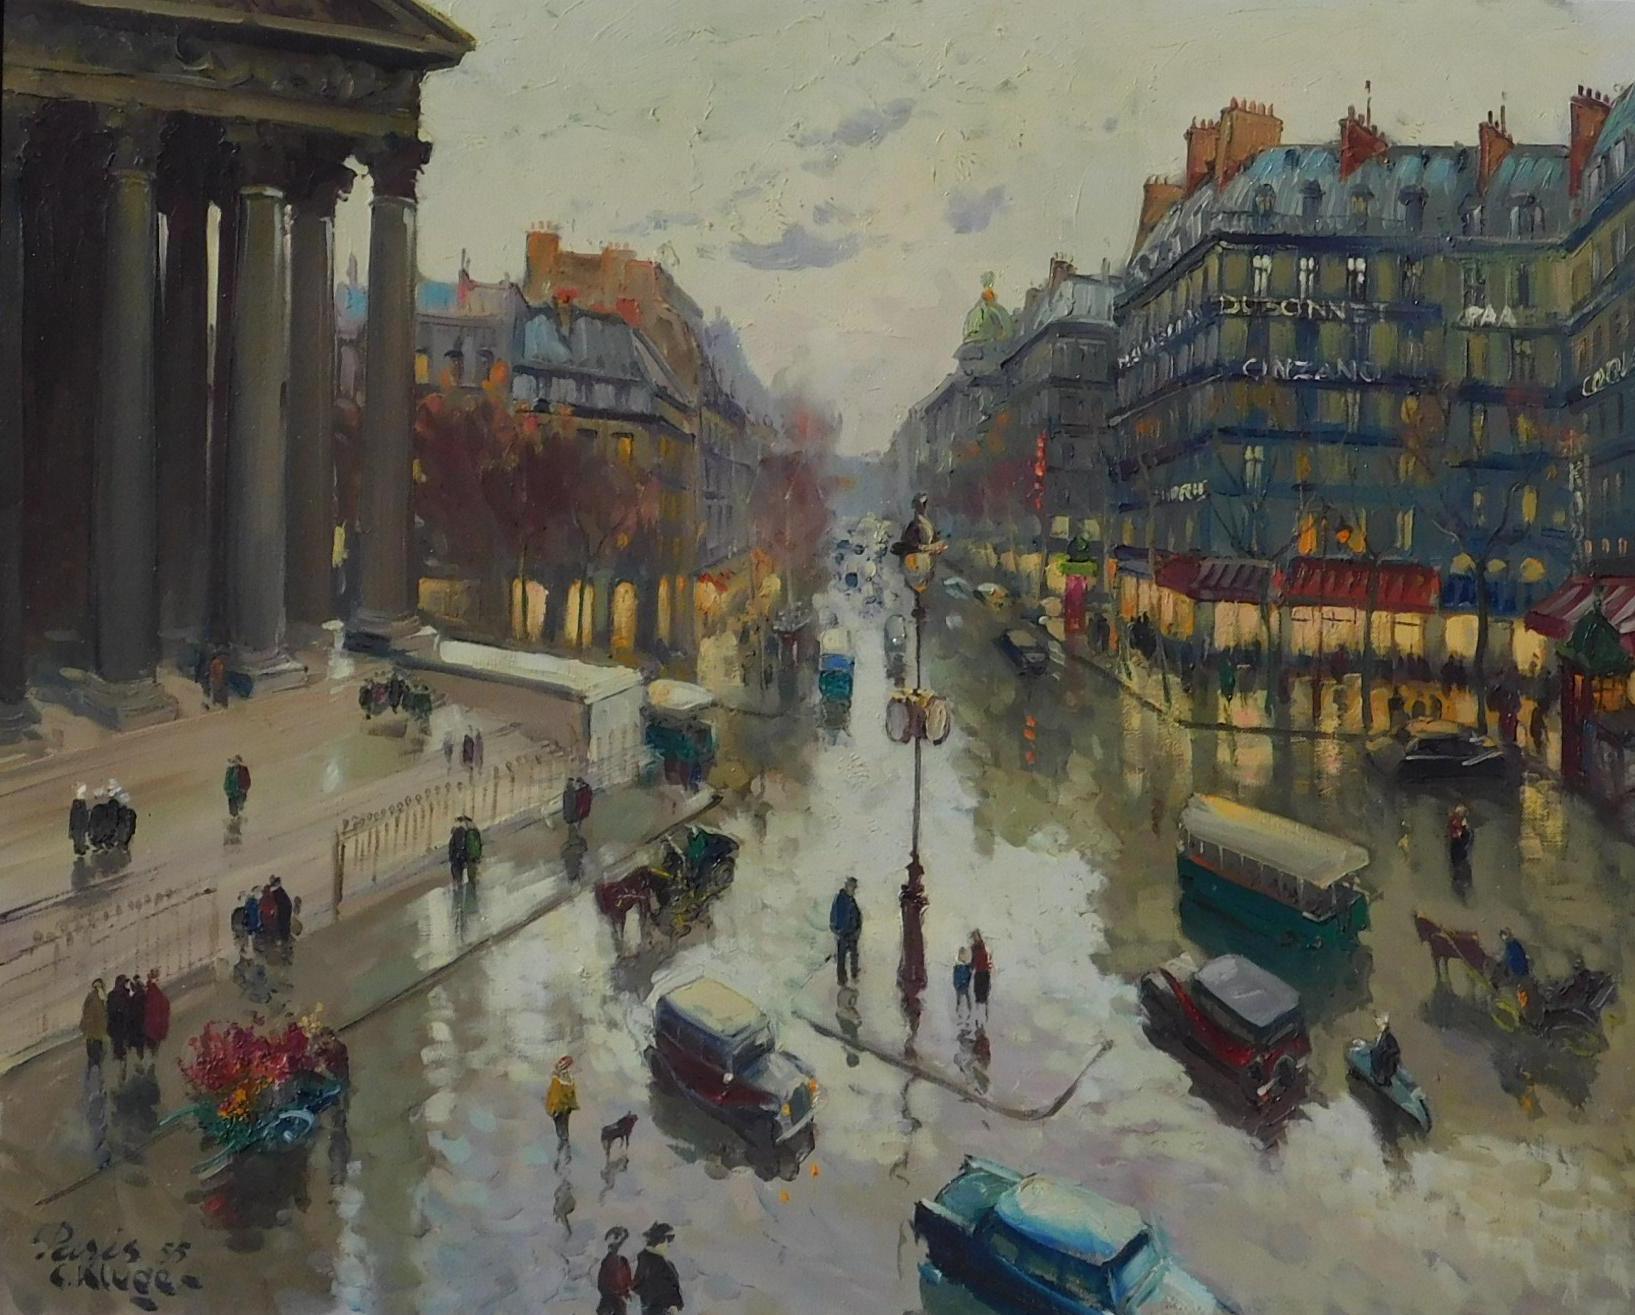 Wonderful atmospheric oil on canvas of Paris by Russian/French artist Constantine Kluge (1912 - 2003).
Signed lower left “C. Kluge” and dated ‘55. In excellent condition. Framed beautifully. 
Painting measures 24 x 30 inches. Frame measures 32 ½ x